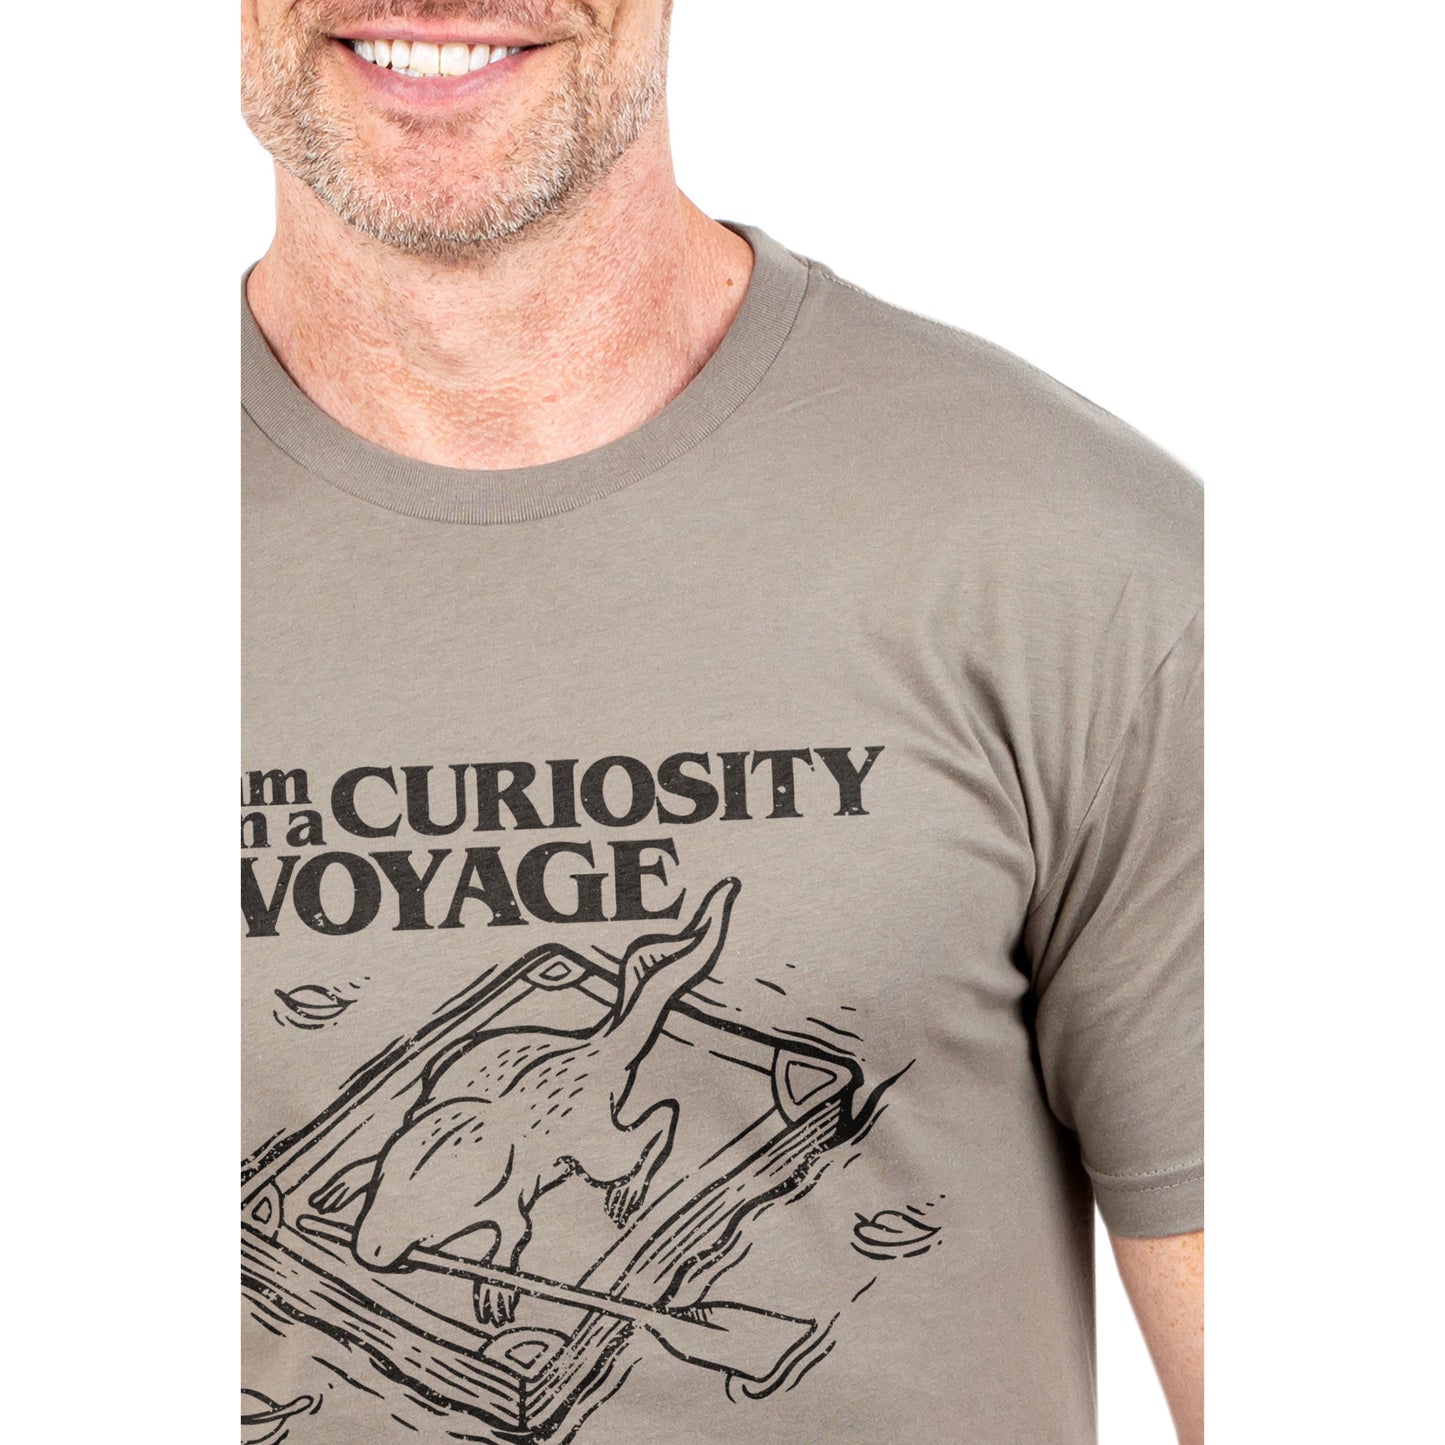 I Am On A Curiosity Voyage And I Need My Paddles To Travel Printed Graphic Men's Crew T-Shirt Heather Tan Closeup Image